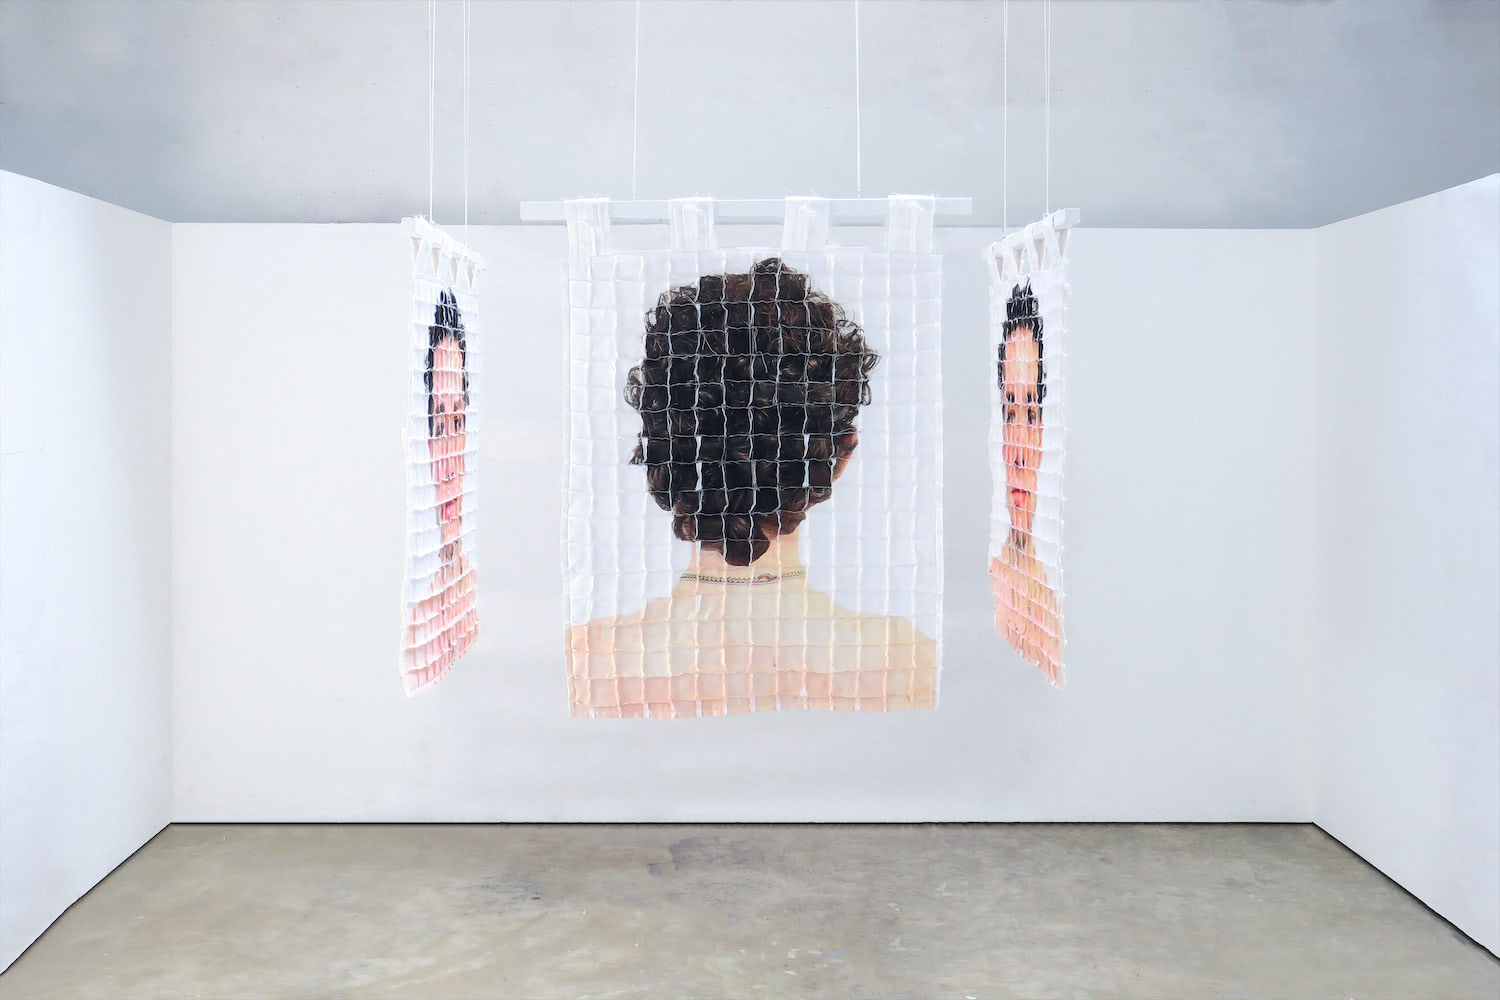 Four quilts hanging in a stark white room, forming a cell-like space. An image of the back of the artist's head, distorted by a grid, faces outward, and is perpendicularly flanked on by a quilt on either side featuring the artist's face distorted by the grid.